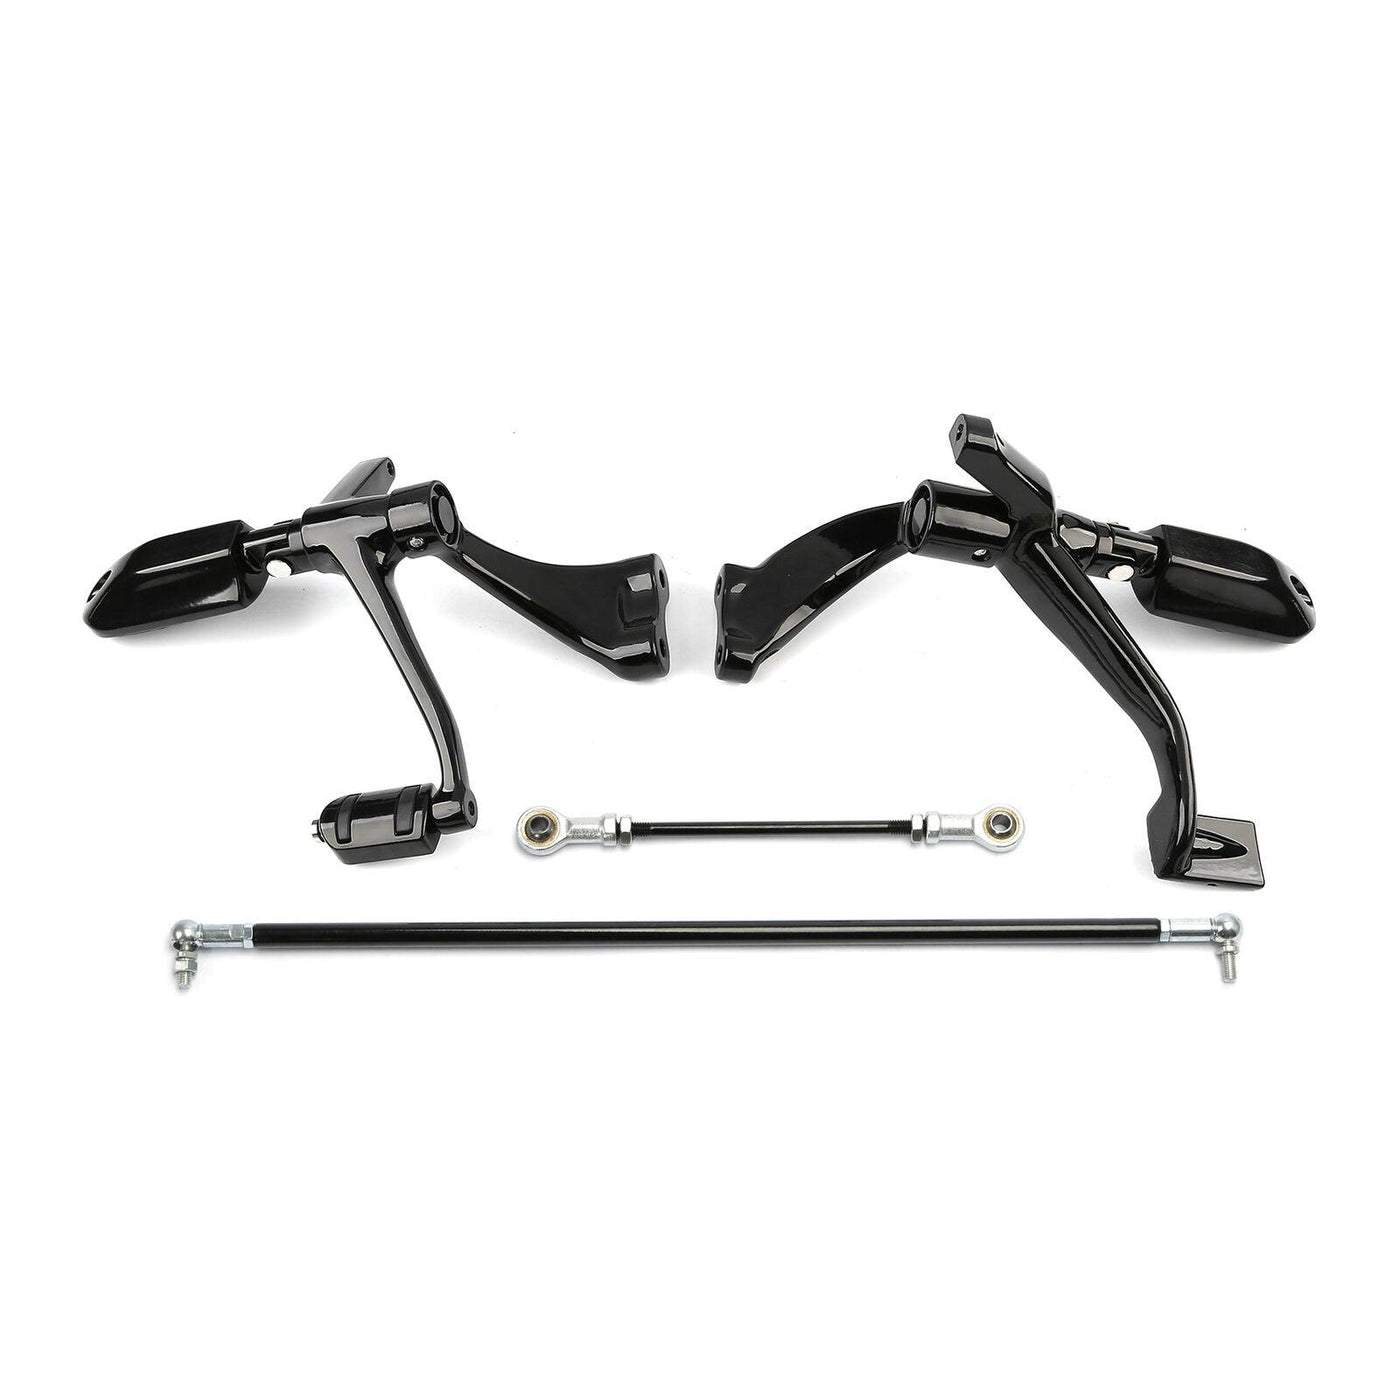 Forward Control Pegs Linkage Levers For Harley Sportster XL883 1200 48 72 04-13 - Moto Life Products